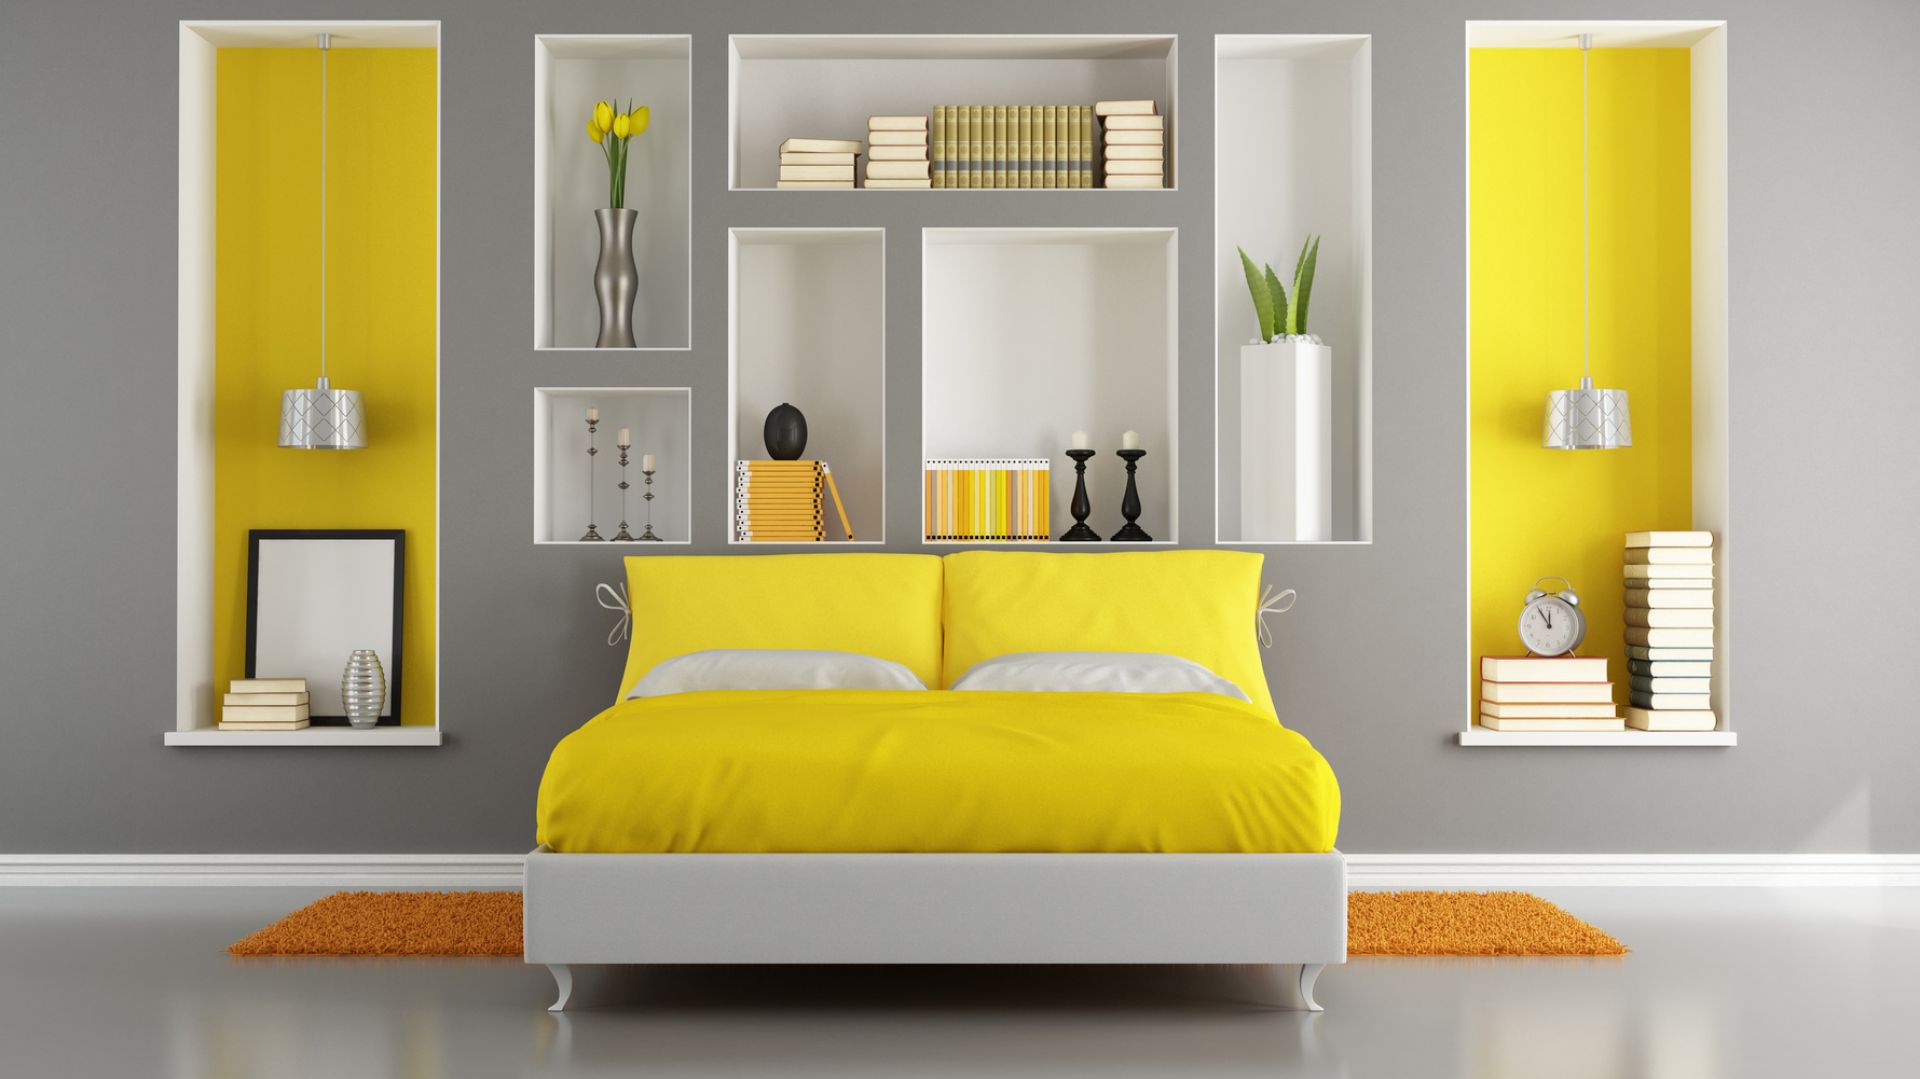 Yellow and Gray Colors in the Bedroom